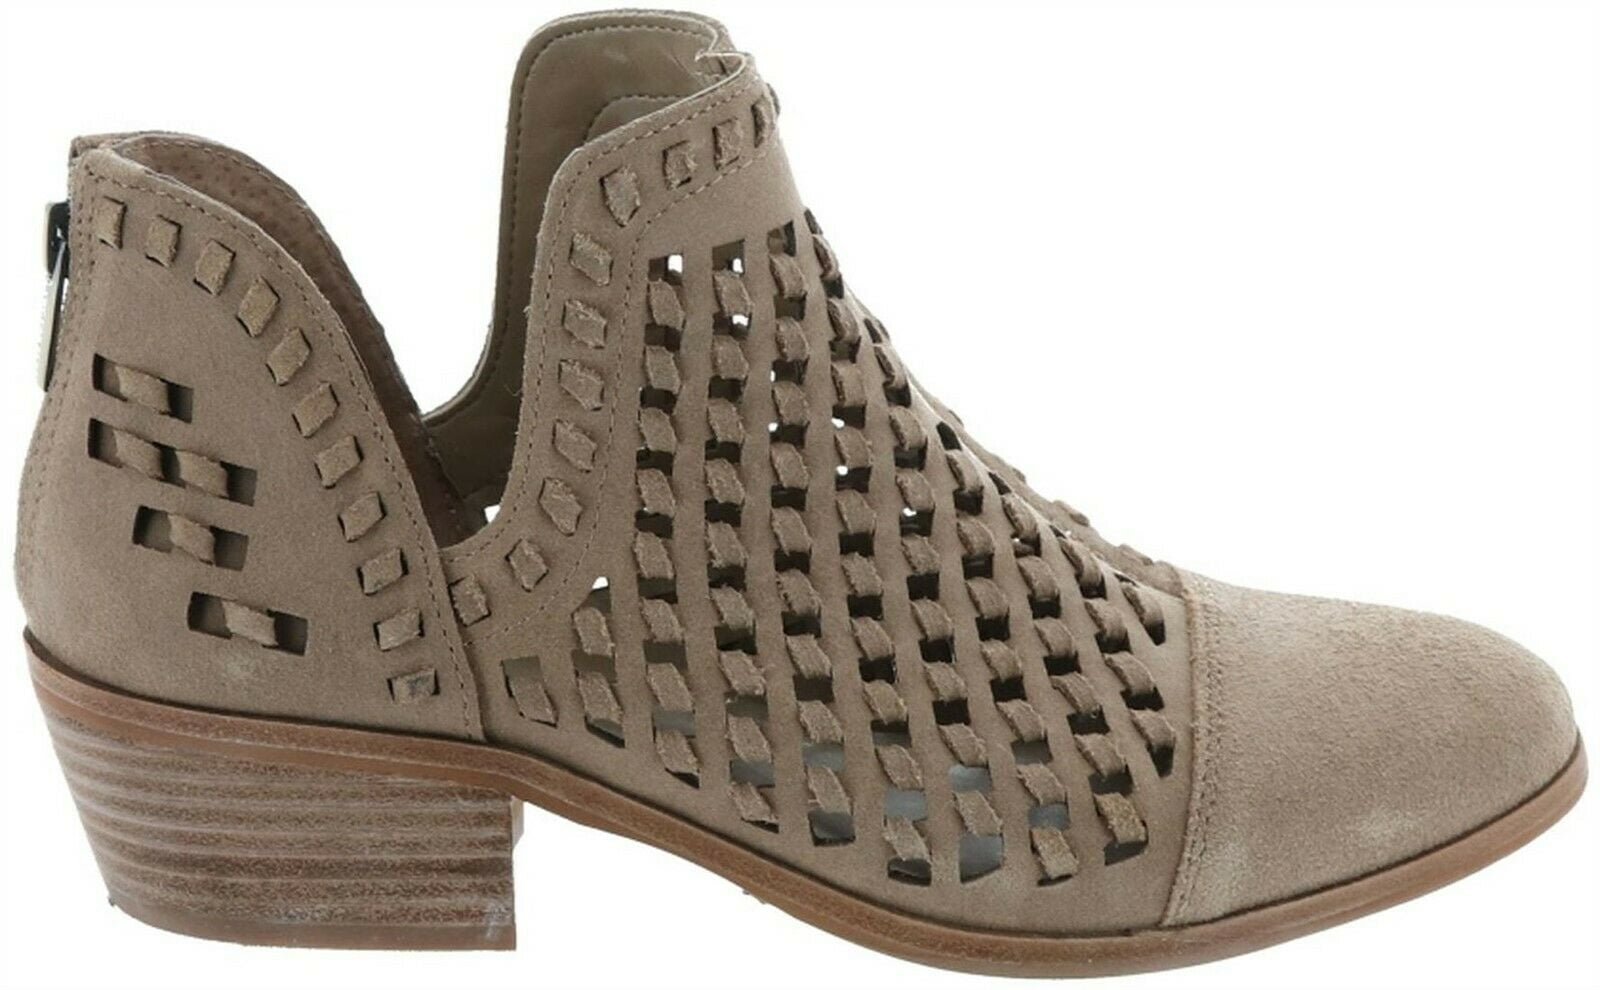 vince camuto cut out booties